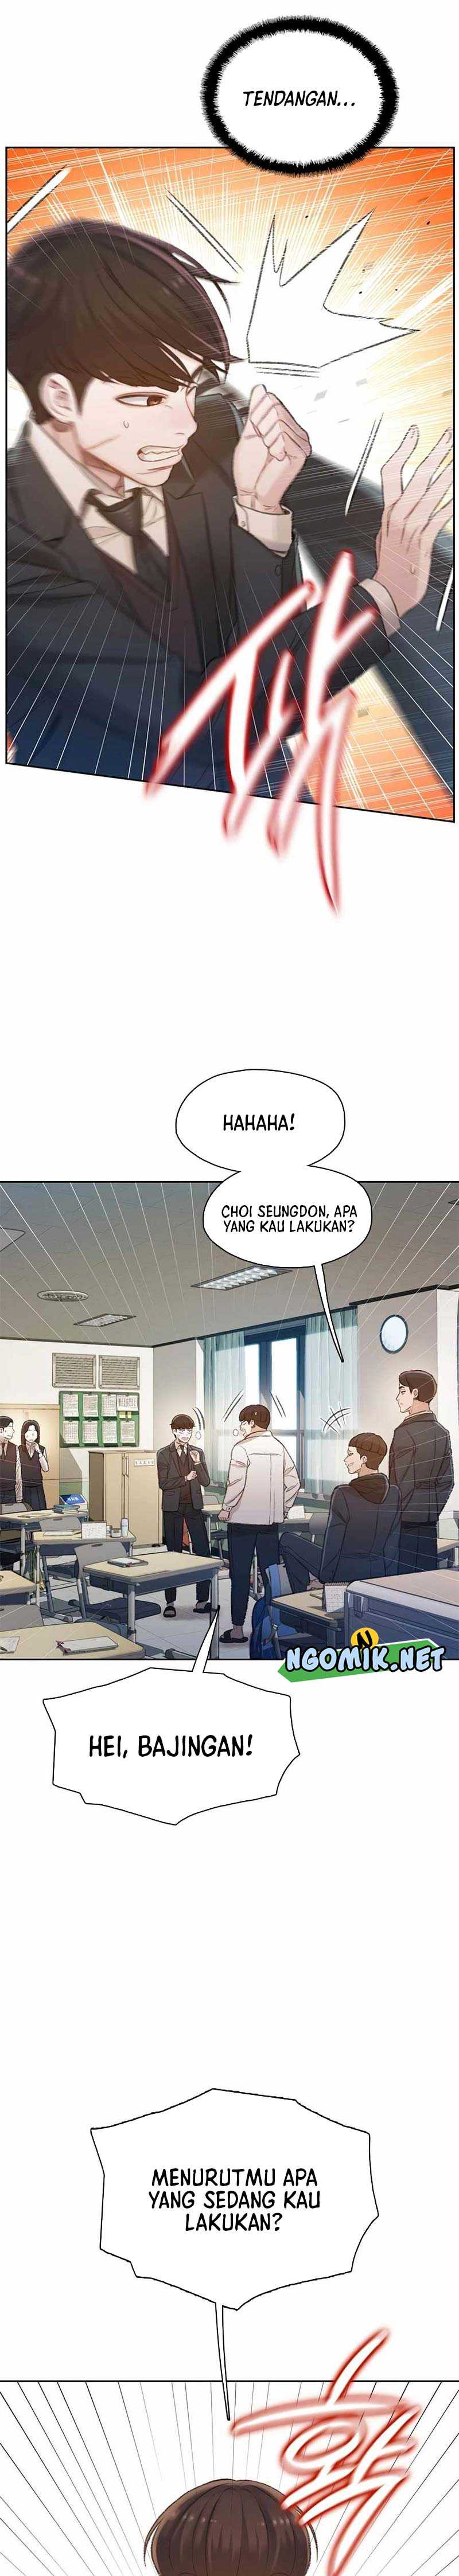 Preview Chapter 03